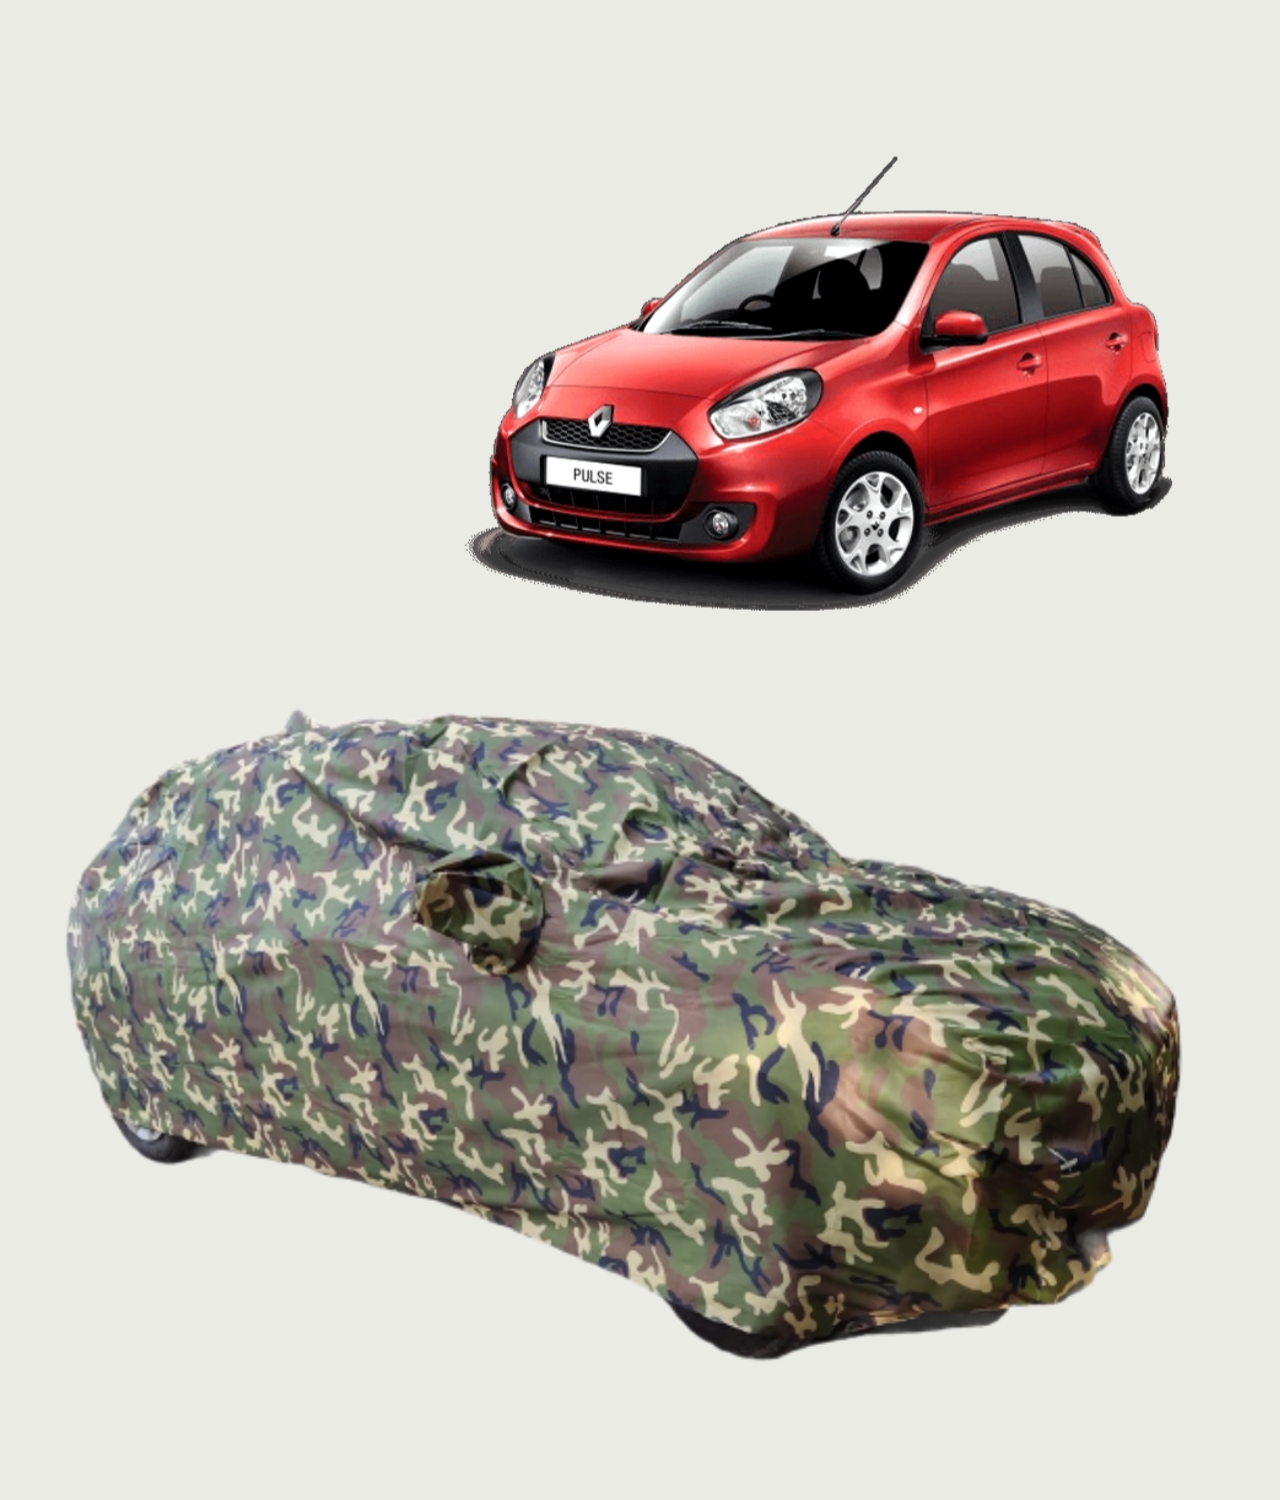 Buy Waterproof Car Body Cover For Nissan Micra Online at Best in